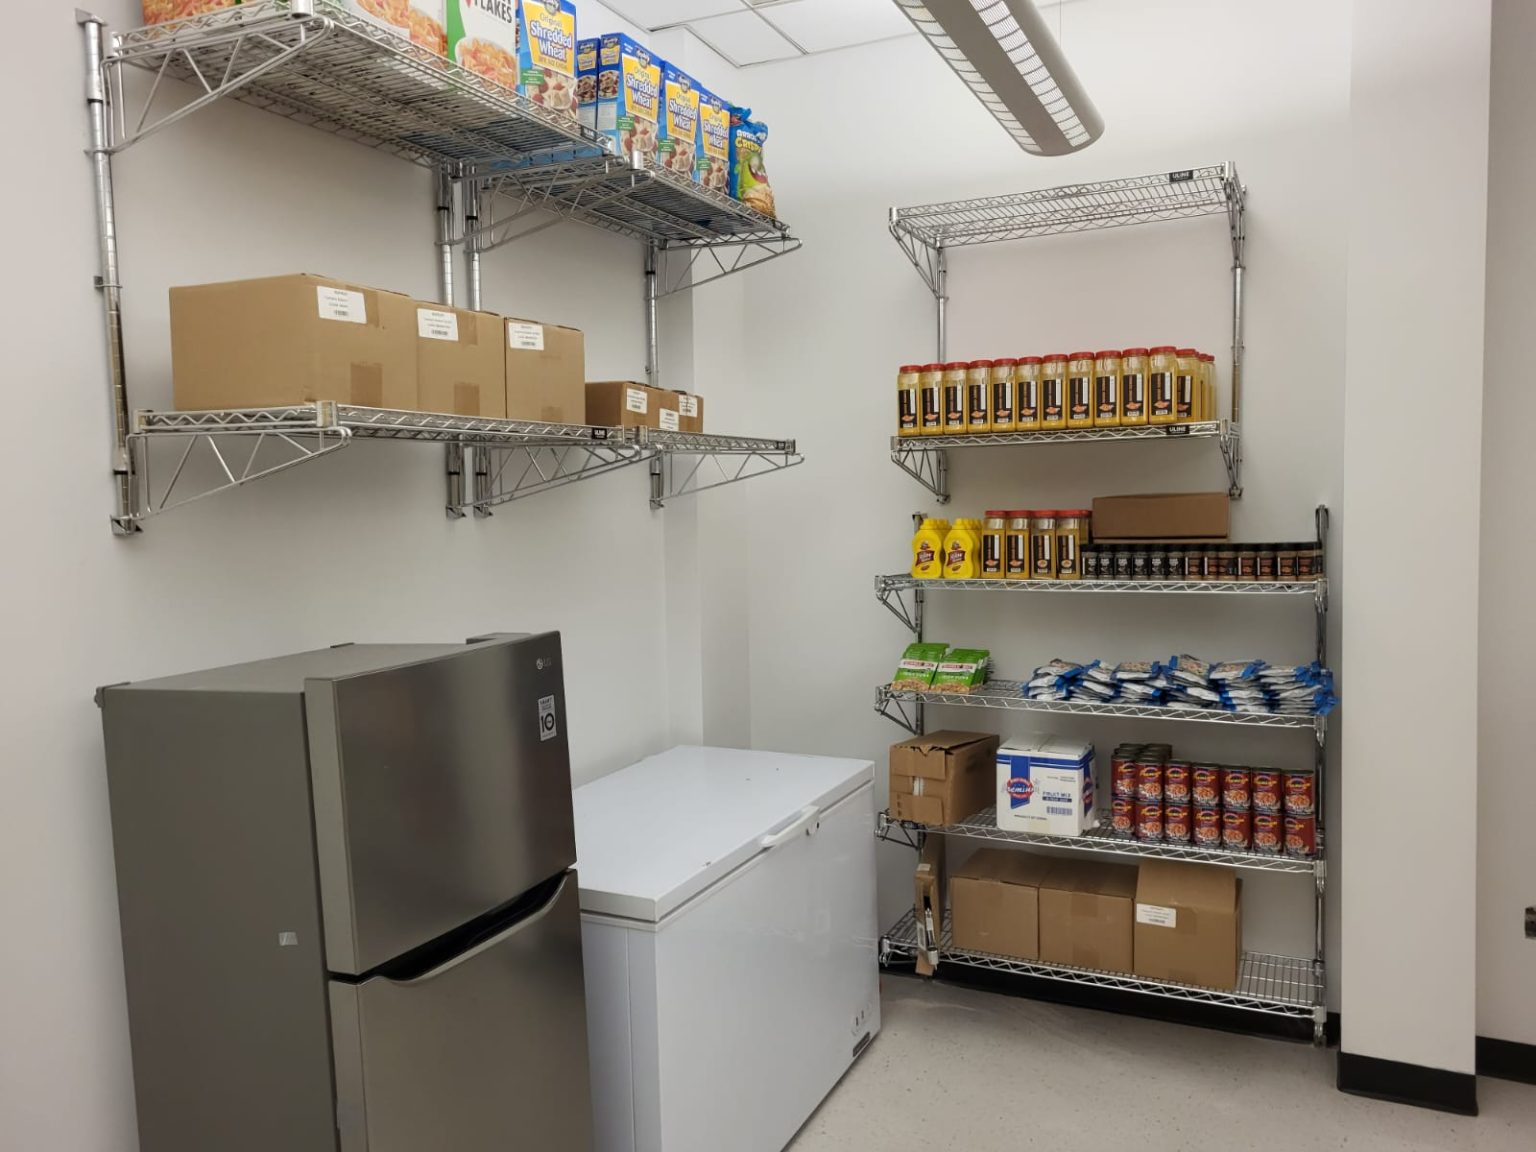 Food Bank for New York City donated a new refrigerator to the new pantry.